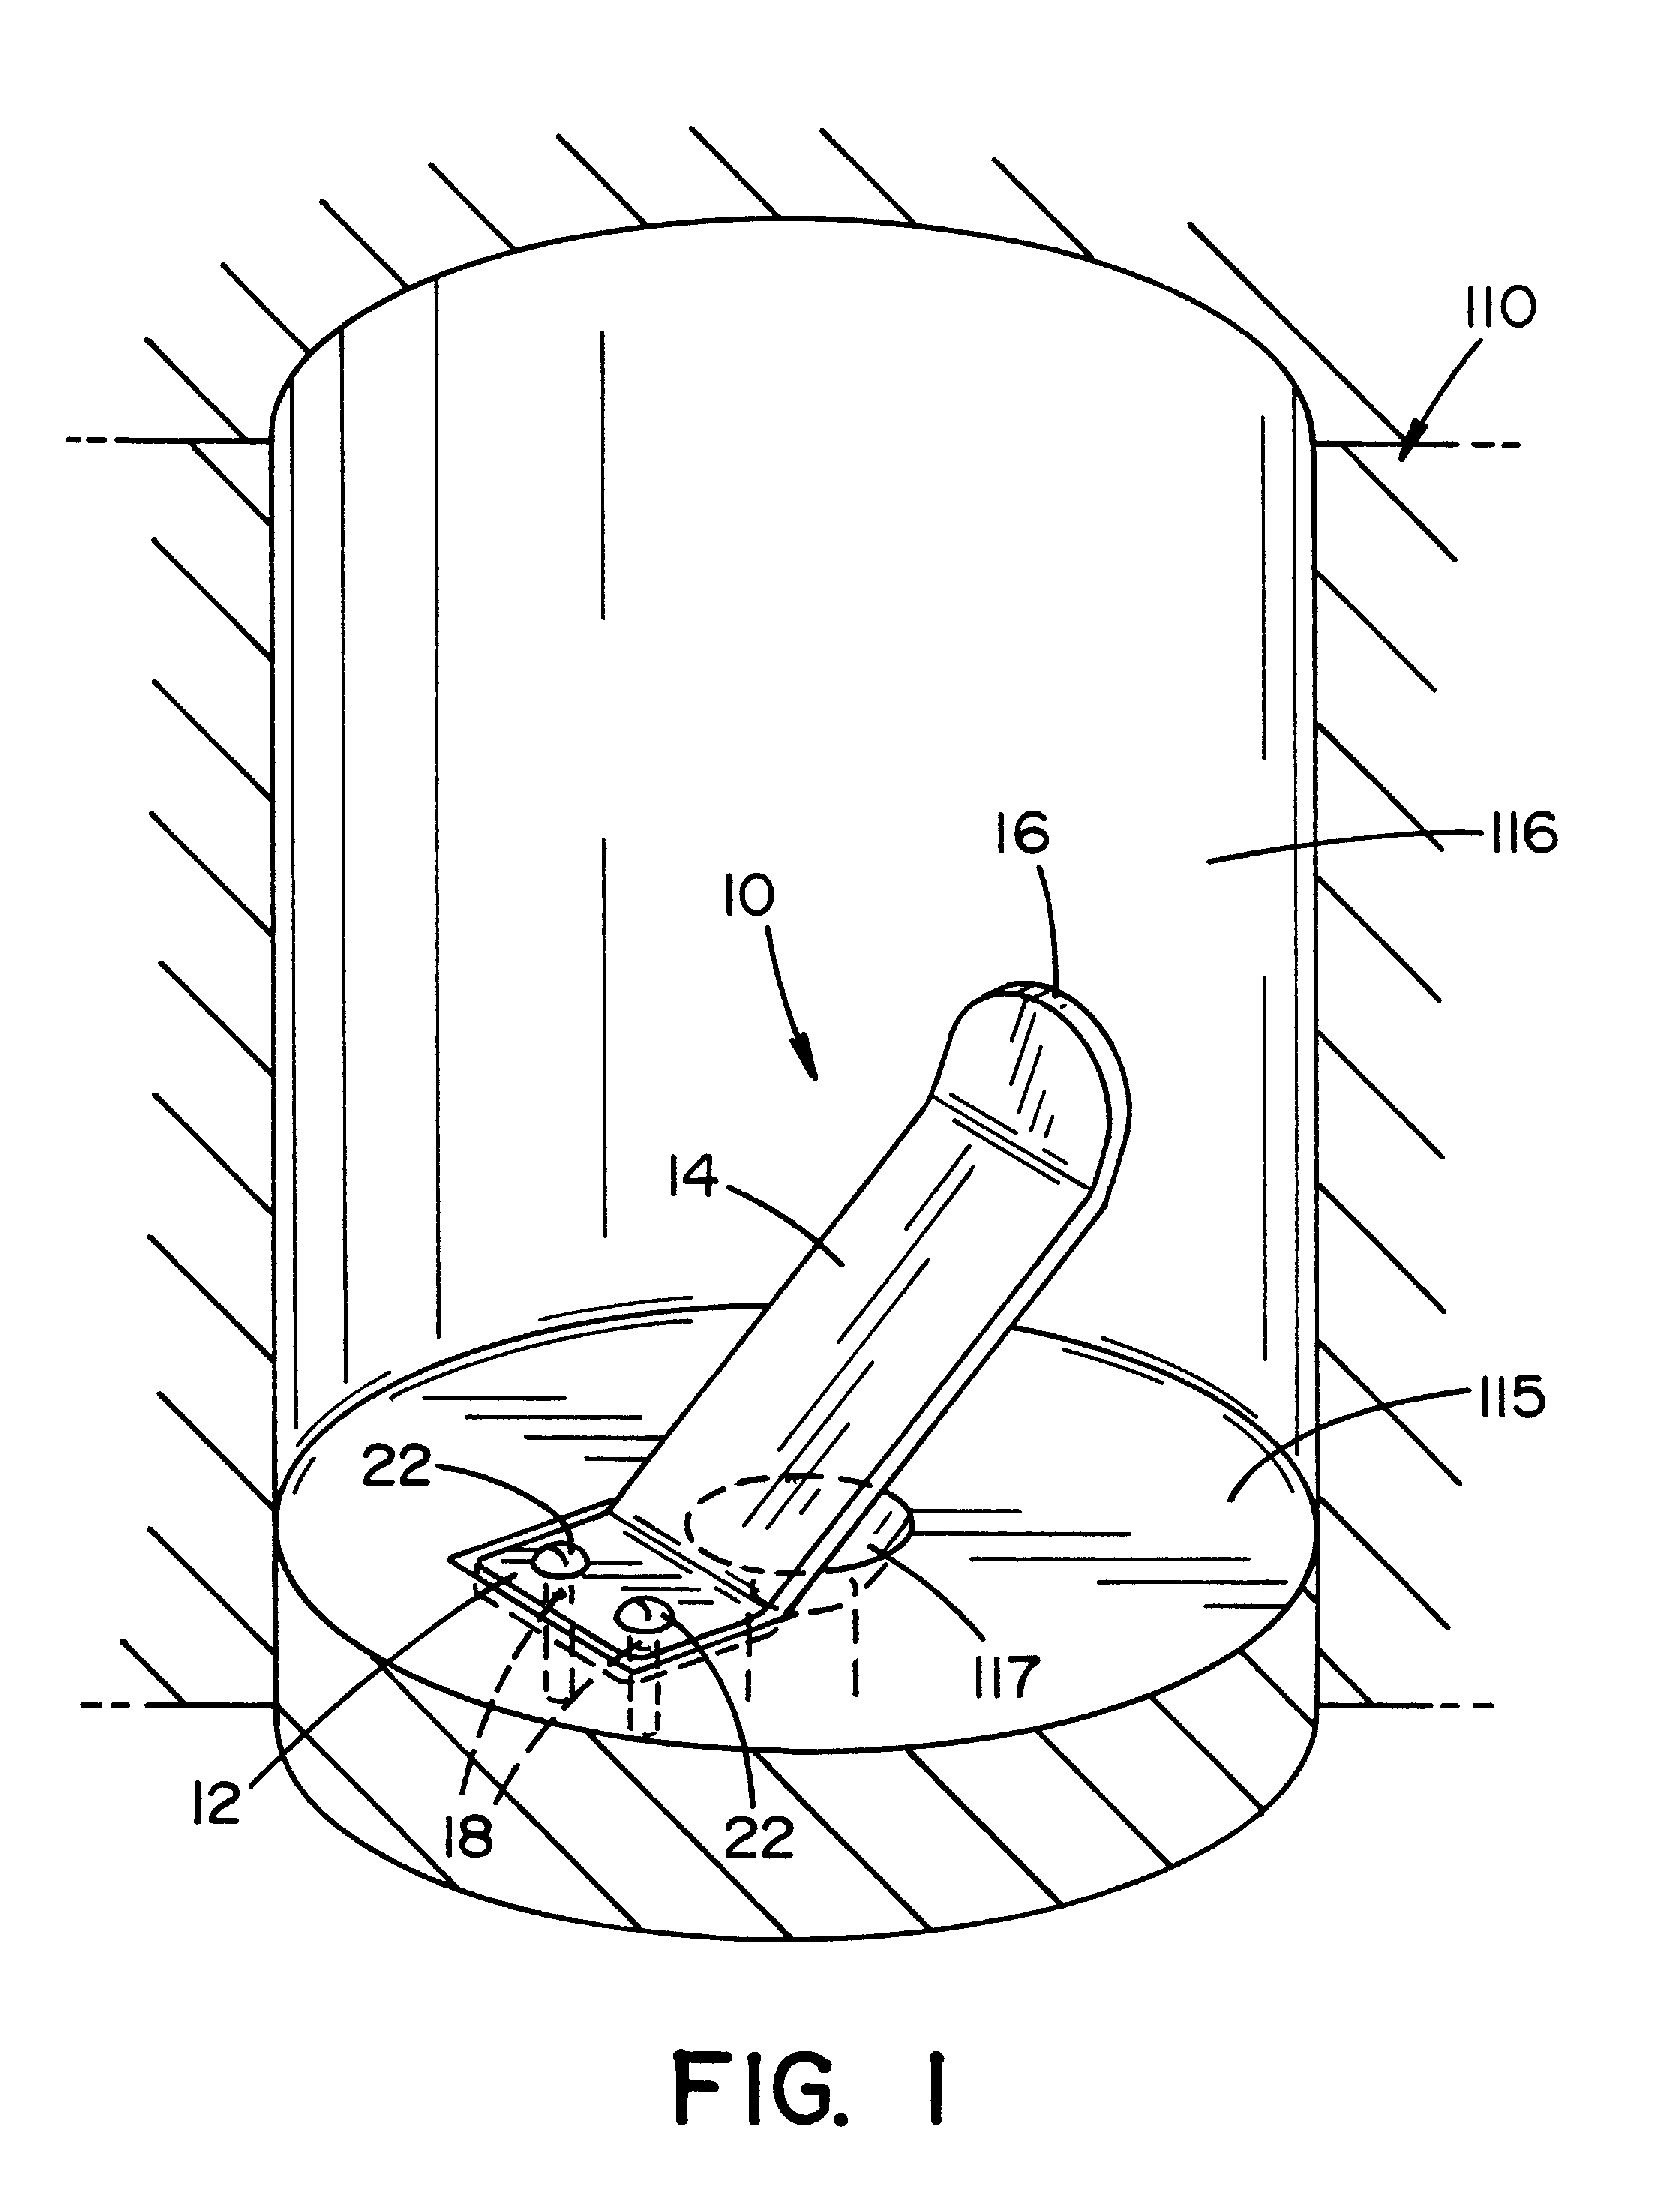 Apparatus for releasing a dry chemistry into a liquid sterilization system